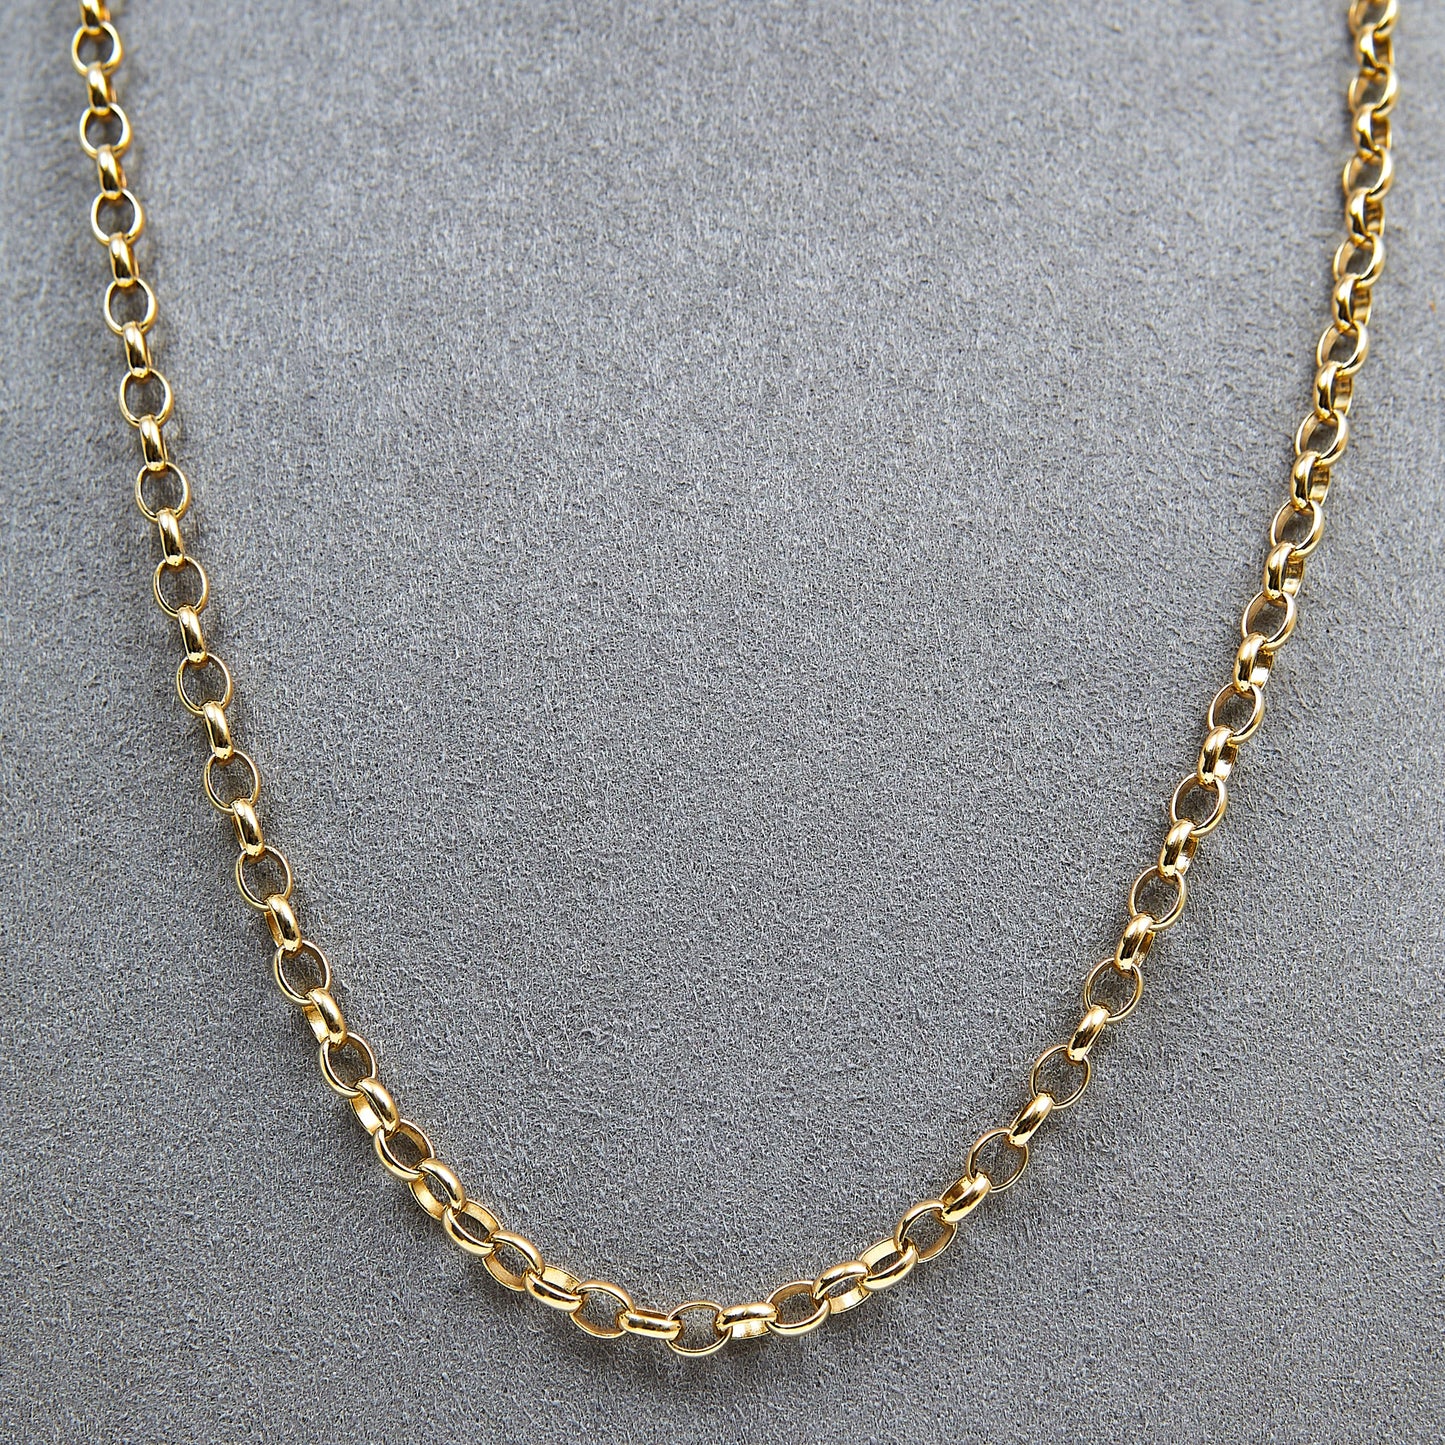 Pre-Owned 9ct Gold 18 Inch Belcher Chain Necklace